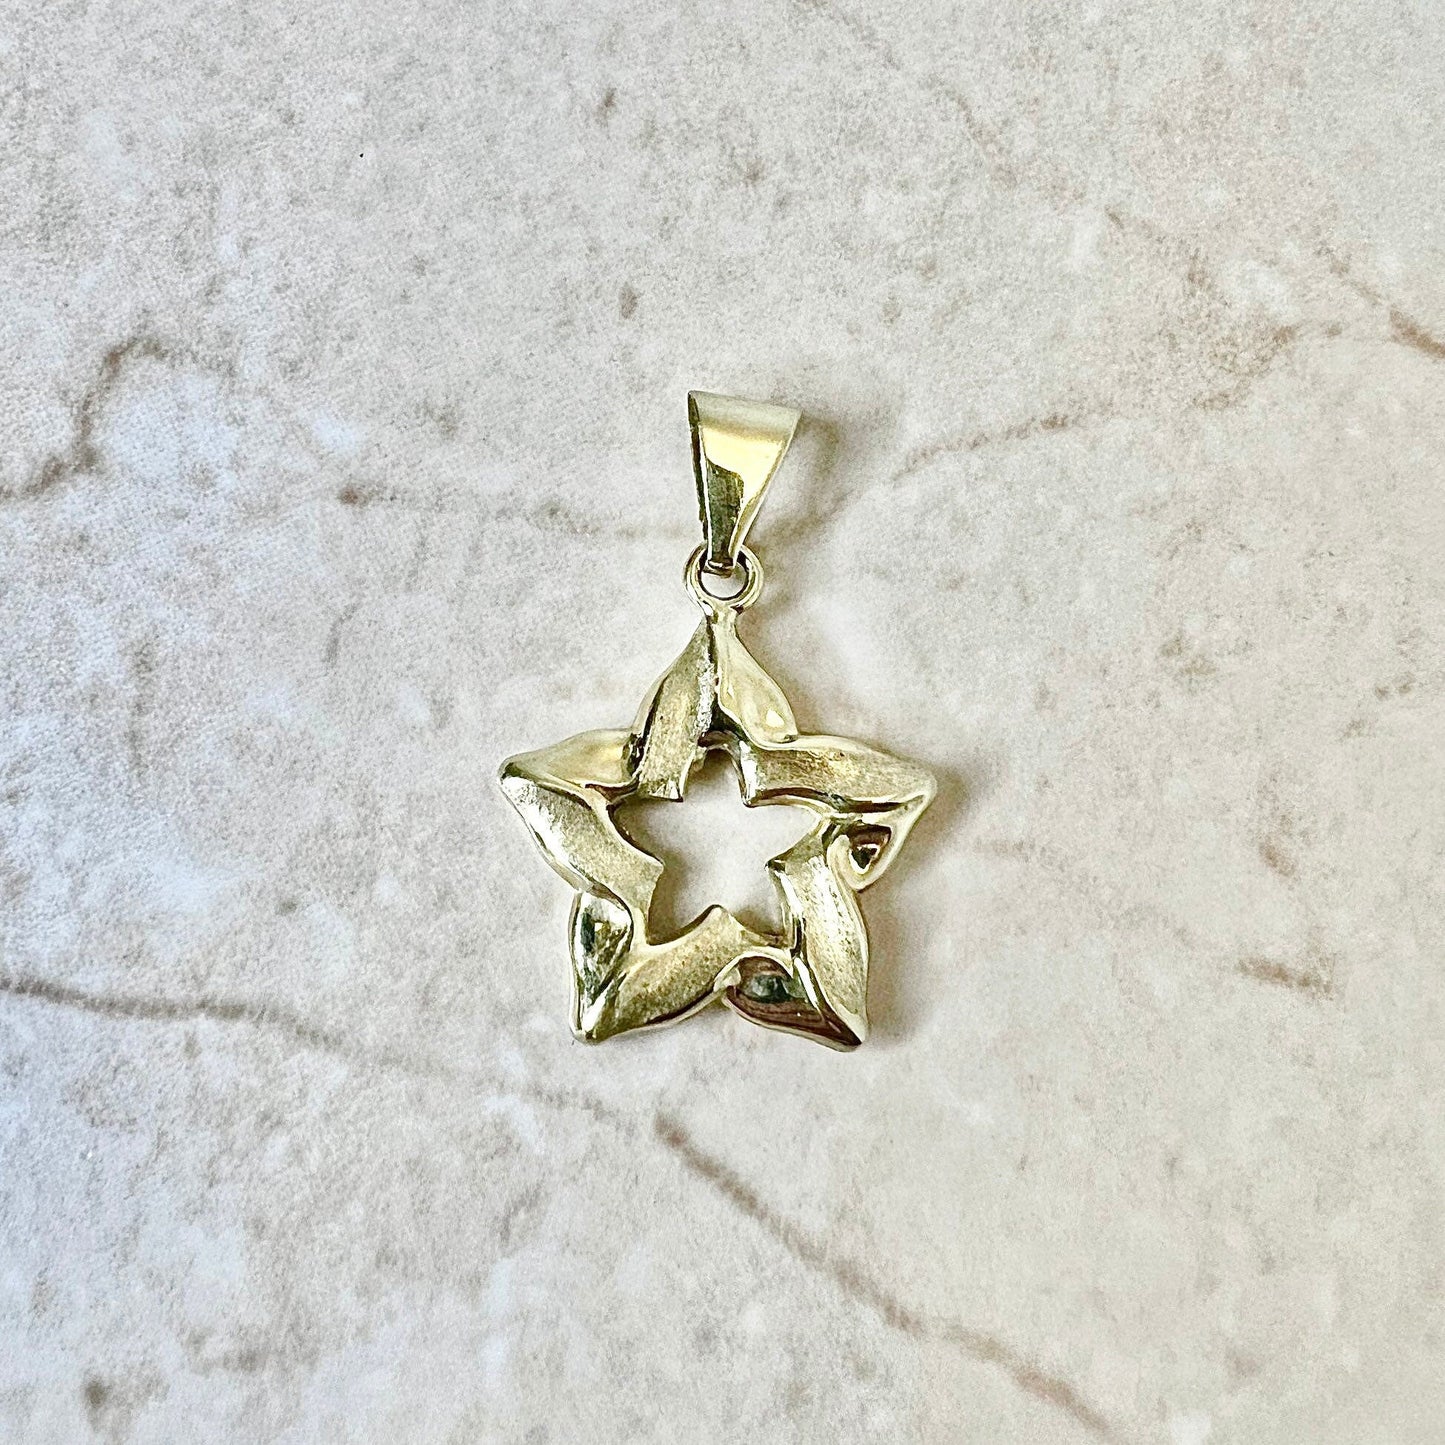 Vintage Handcrafted 18K Gold Pendant Necklace - Reversible Star Pendant - Yellow Gold Necklace - Solid Gold Pendant - 18K Gold Jewelry